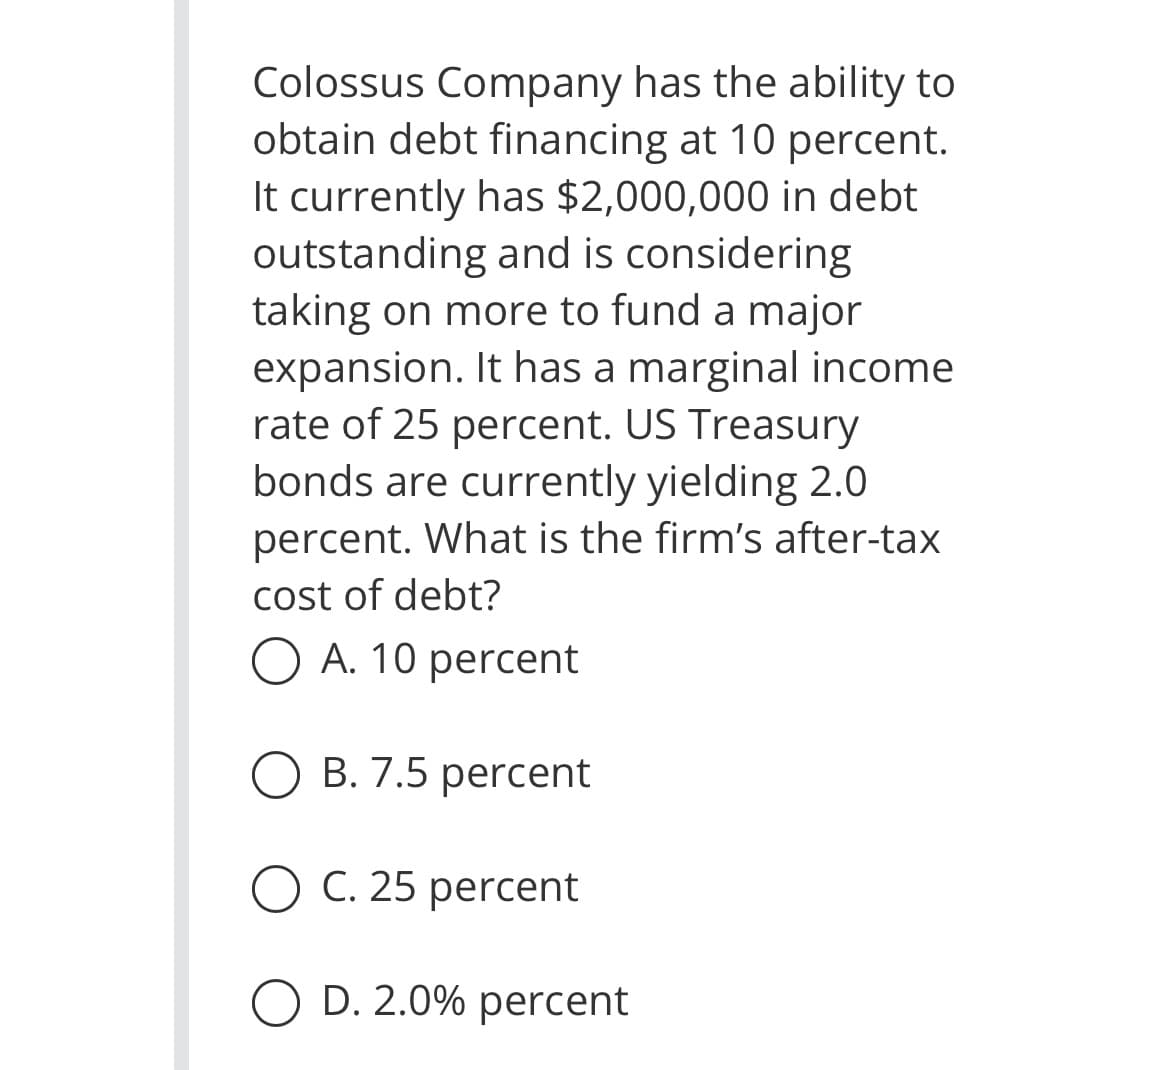 Colossus Company has the ability to
obtain debt financing at 10 percent.
It currently has $2,000,000 in debt.
outstanding and is considering
taking on more to fund a major
expansion. It has a marginal income
rate of 25 percent. US Treasury
bonds are currently yielding 2.0
percent. What is the firm's after-tax
cost of debt?
O A. 10 percent
O B. 7.5 percent
C. 25 percent
O D. 2.0% percent